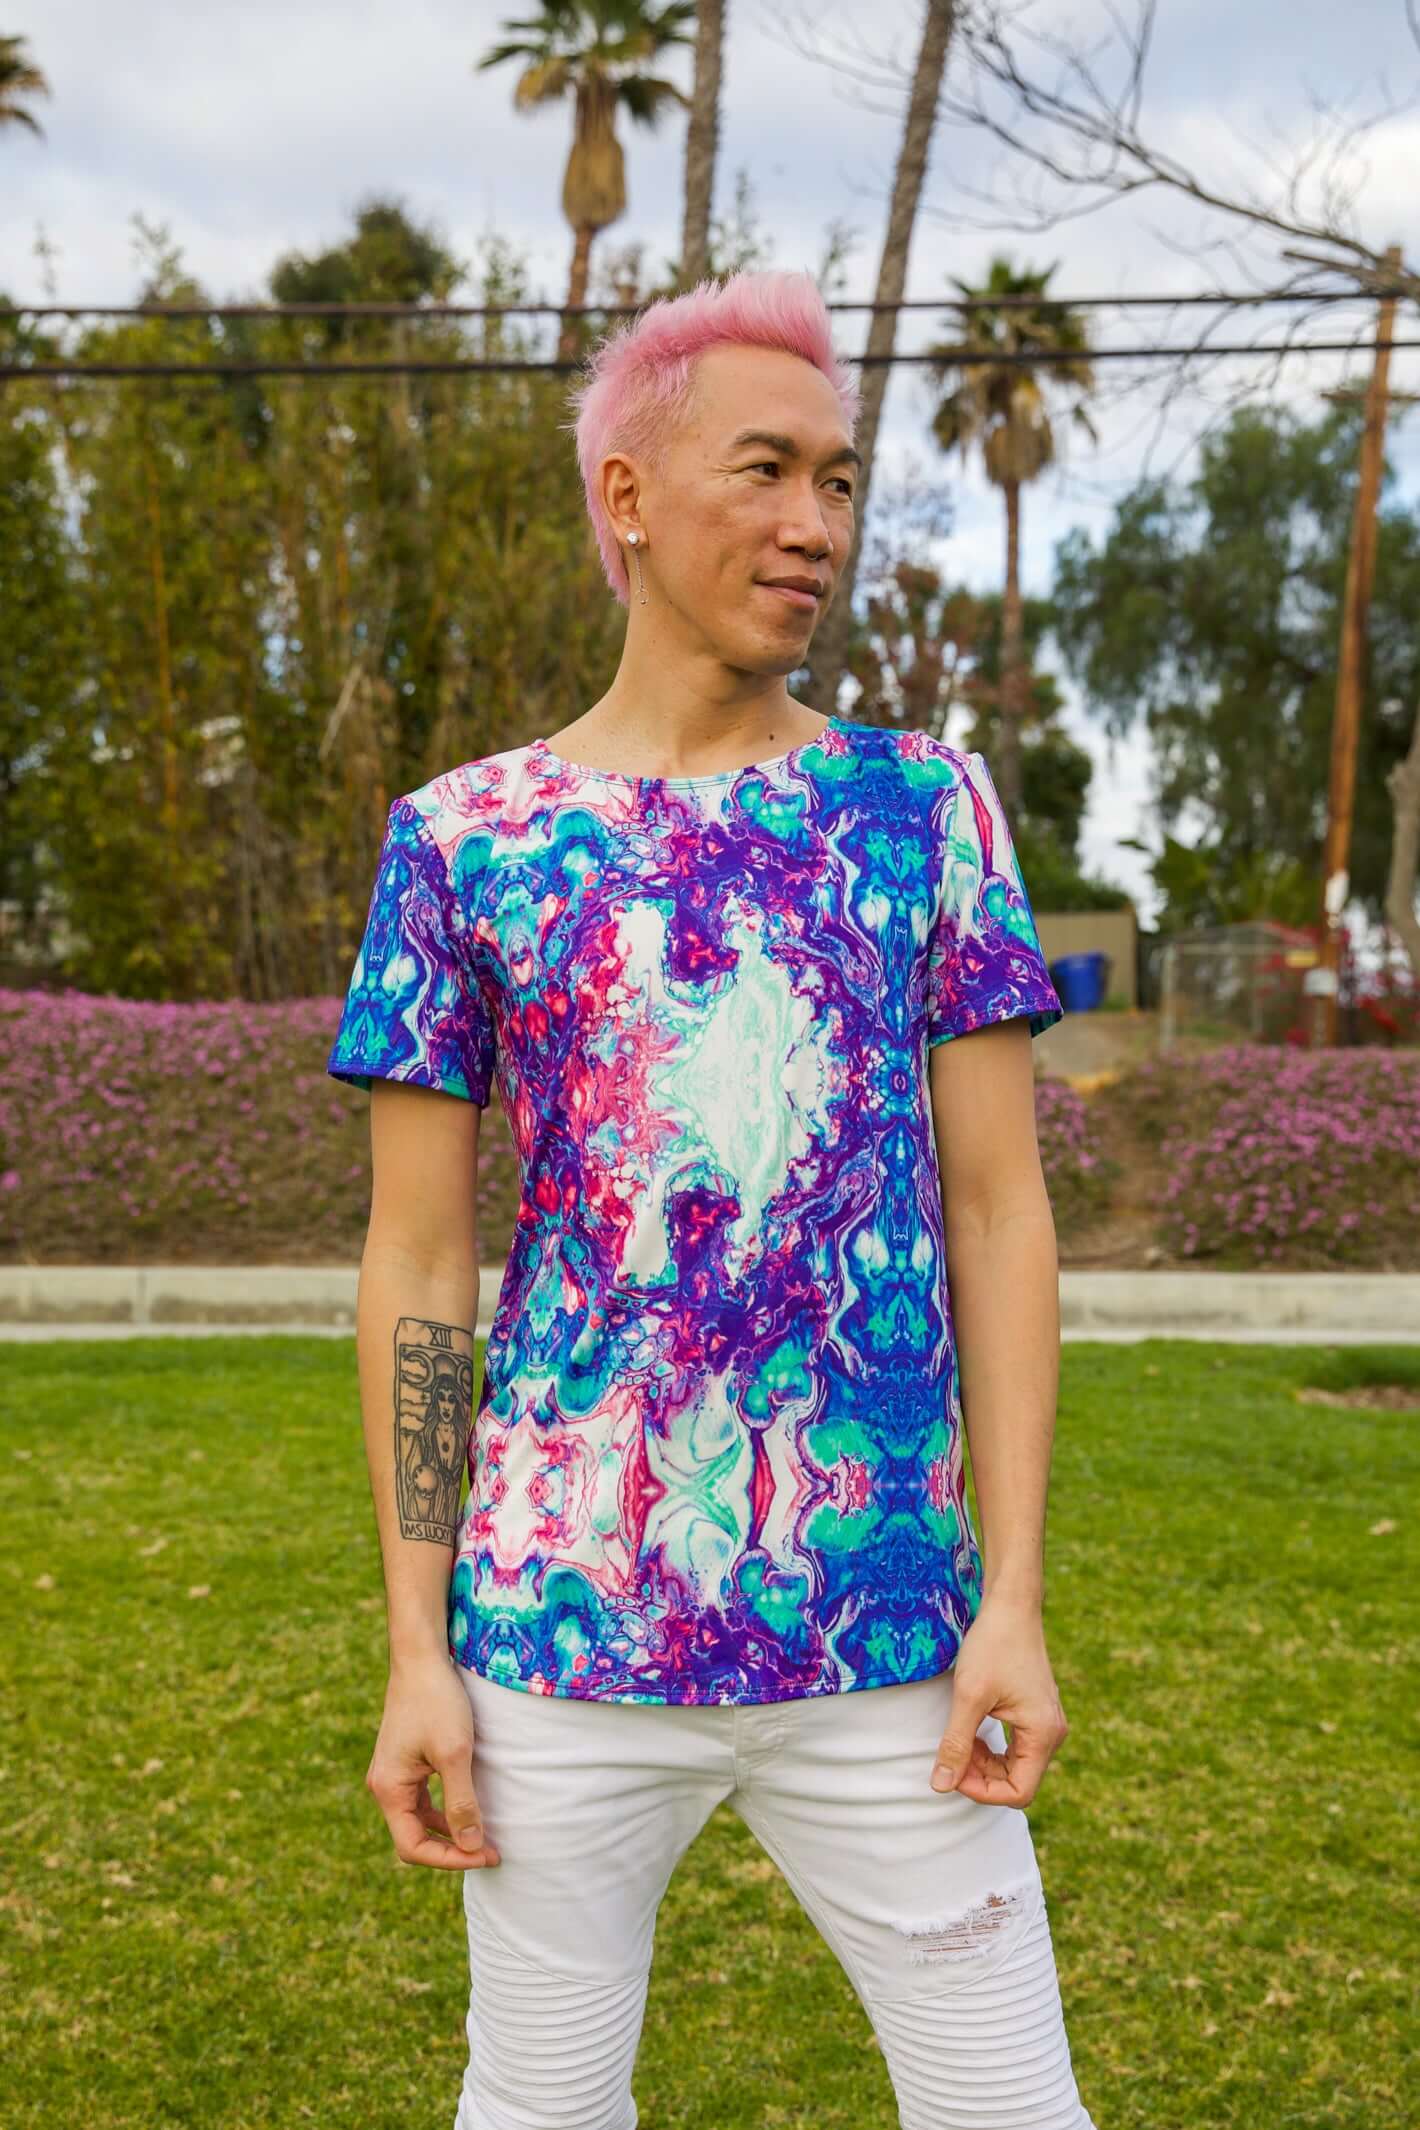 What do guys wear to raves? Freedom Rave Wear's Bubble Bath 2.0 mens t-shirt.